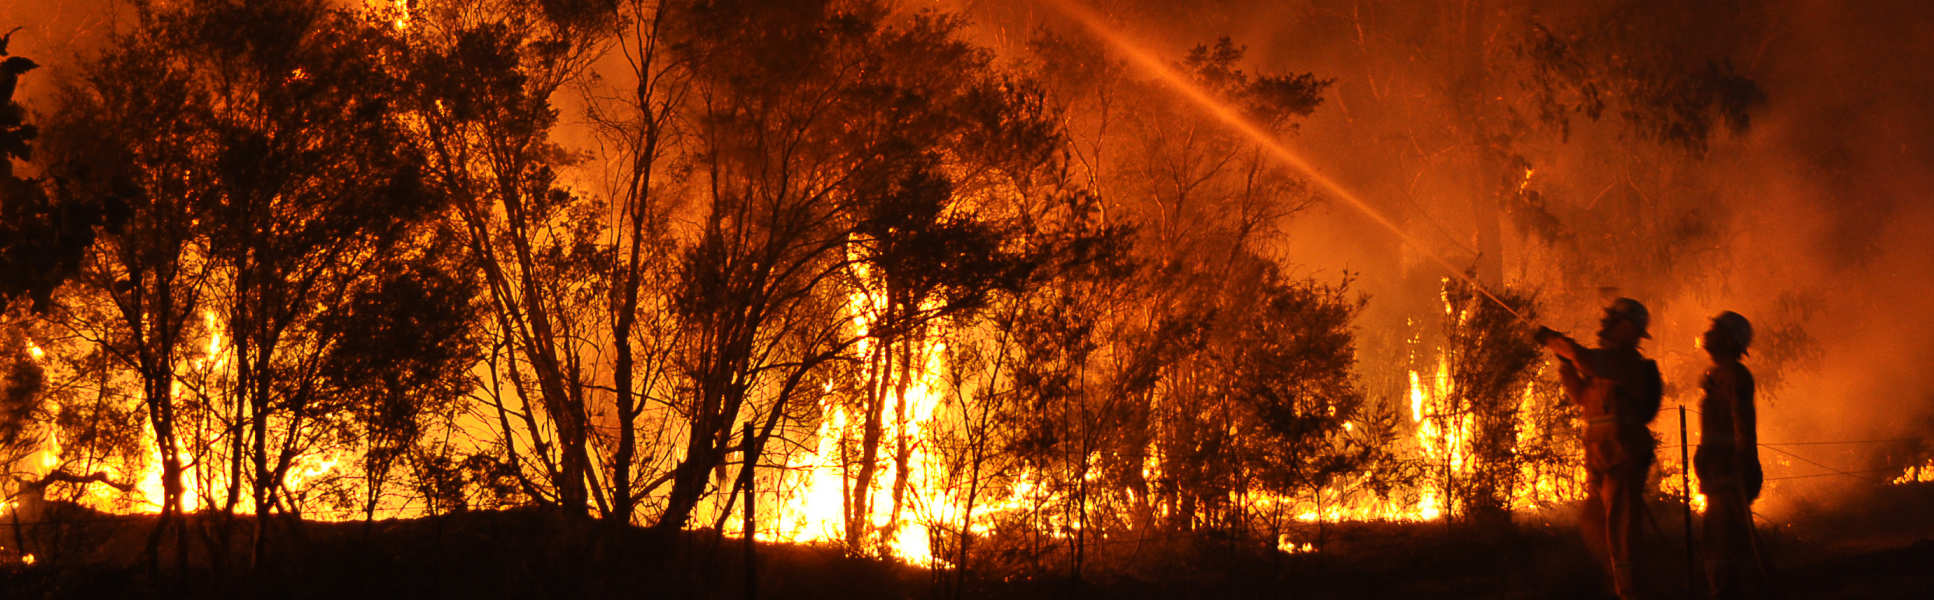 Firefighters tackling a forest fire at night